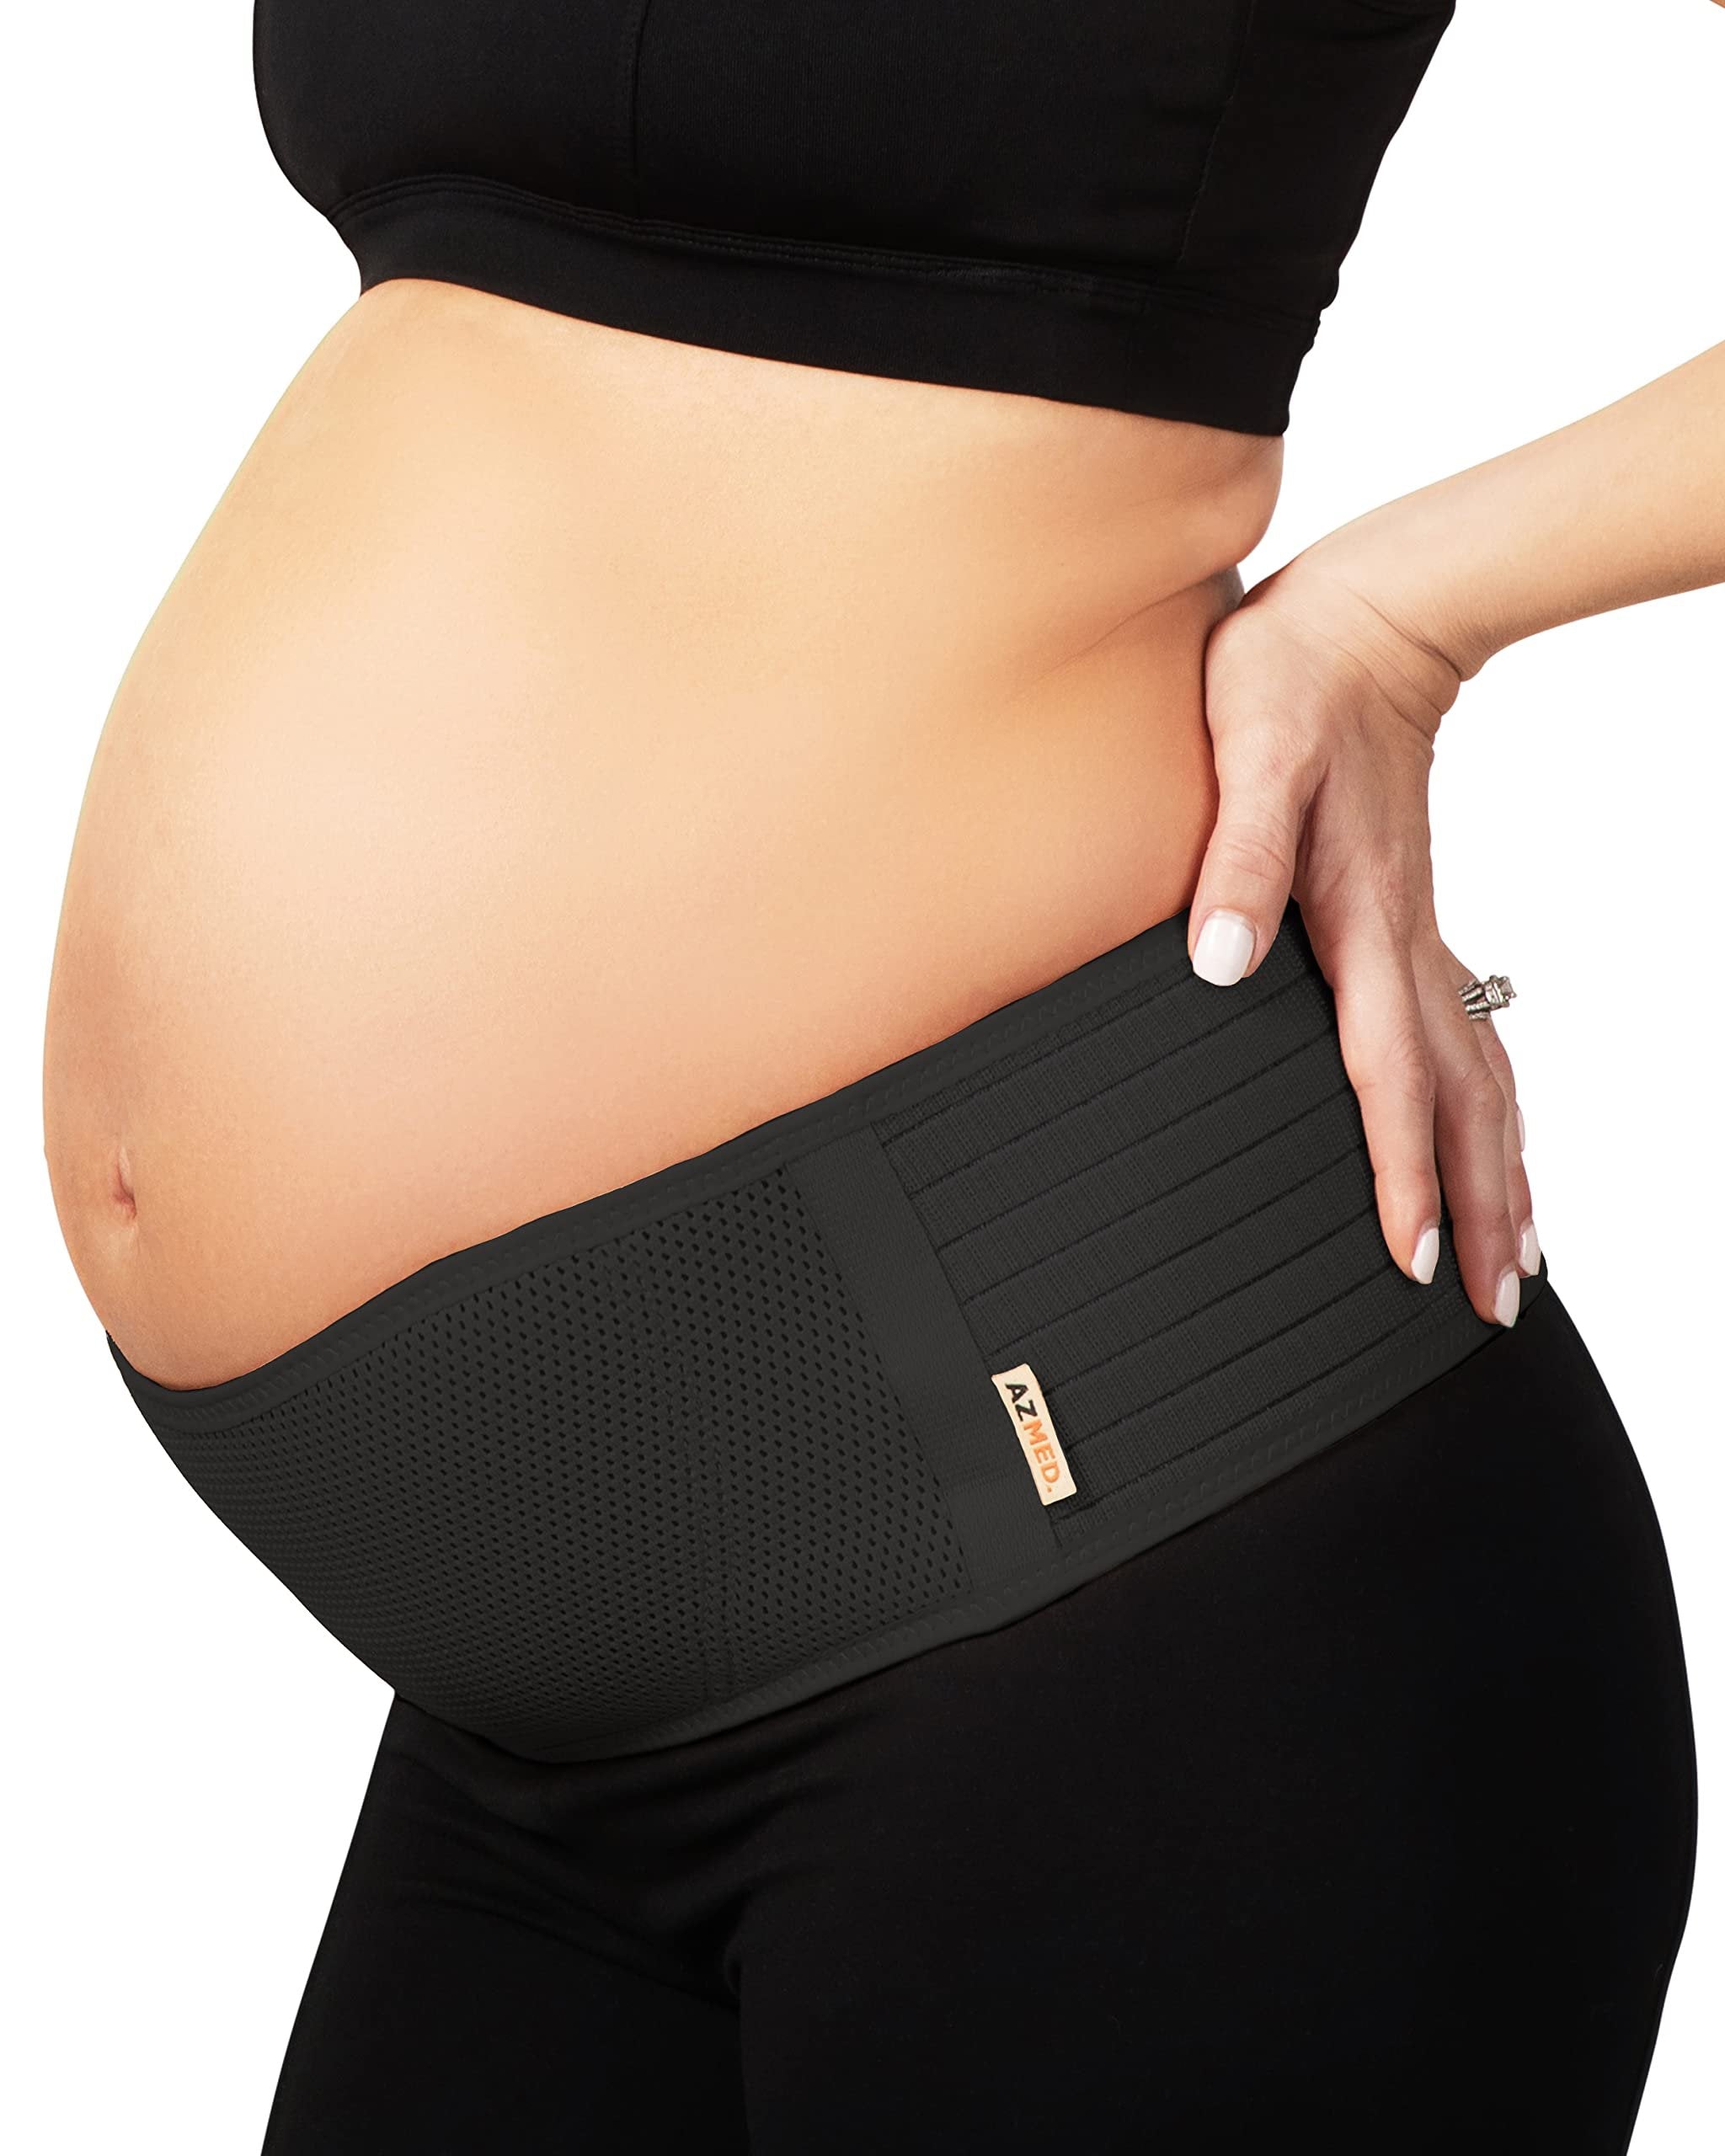 AZMED Maternity Belly Band Black | Adjustable Support Belt for All Stages of Pregnancy | One Size Fits Most